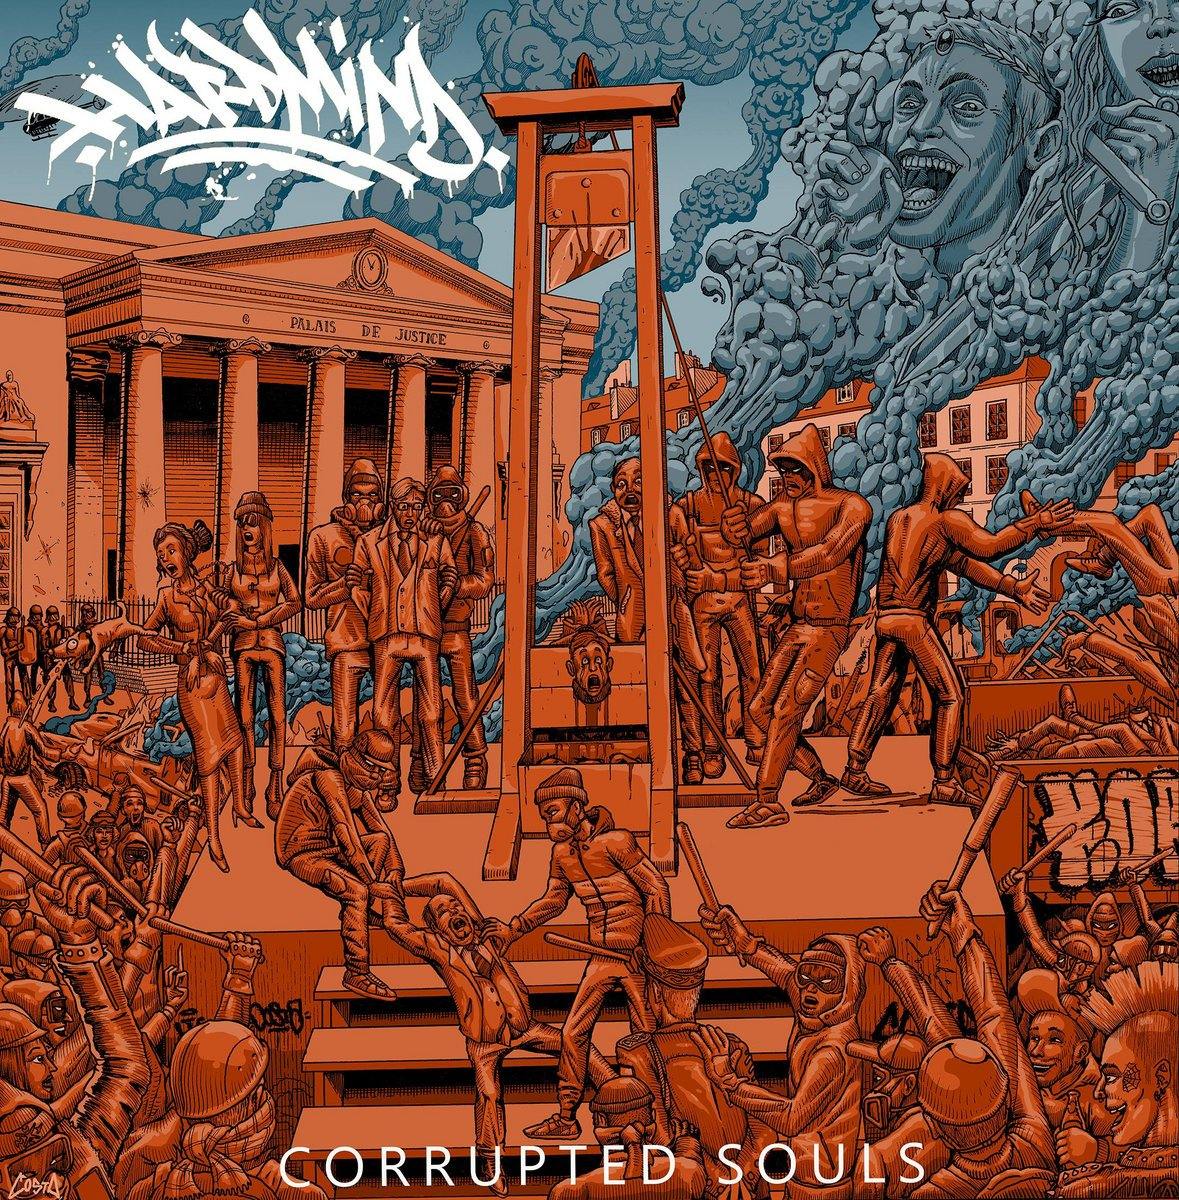 Buy – Hard Mind "Corrupted Souls" CD – Band & Music Merch – Cold Cuts Merch